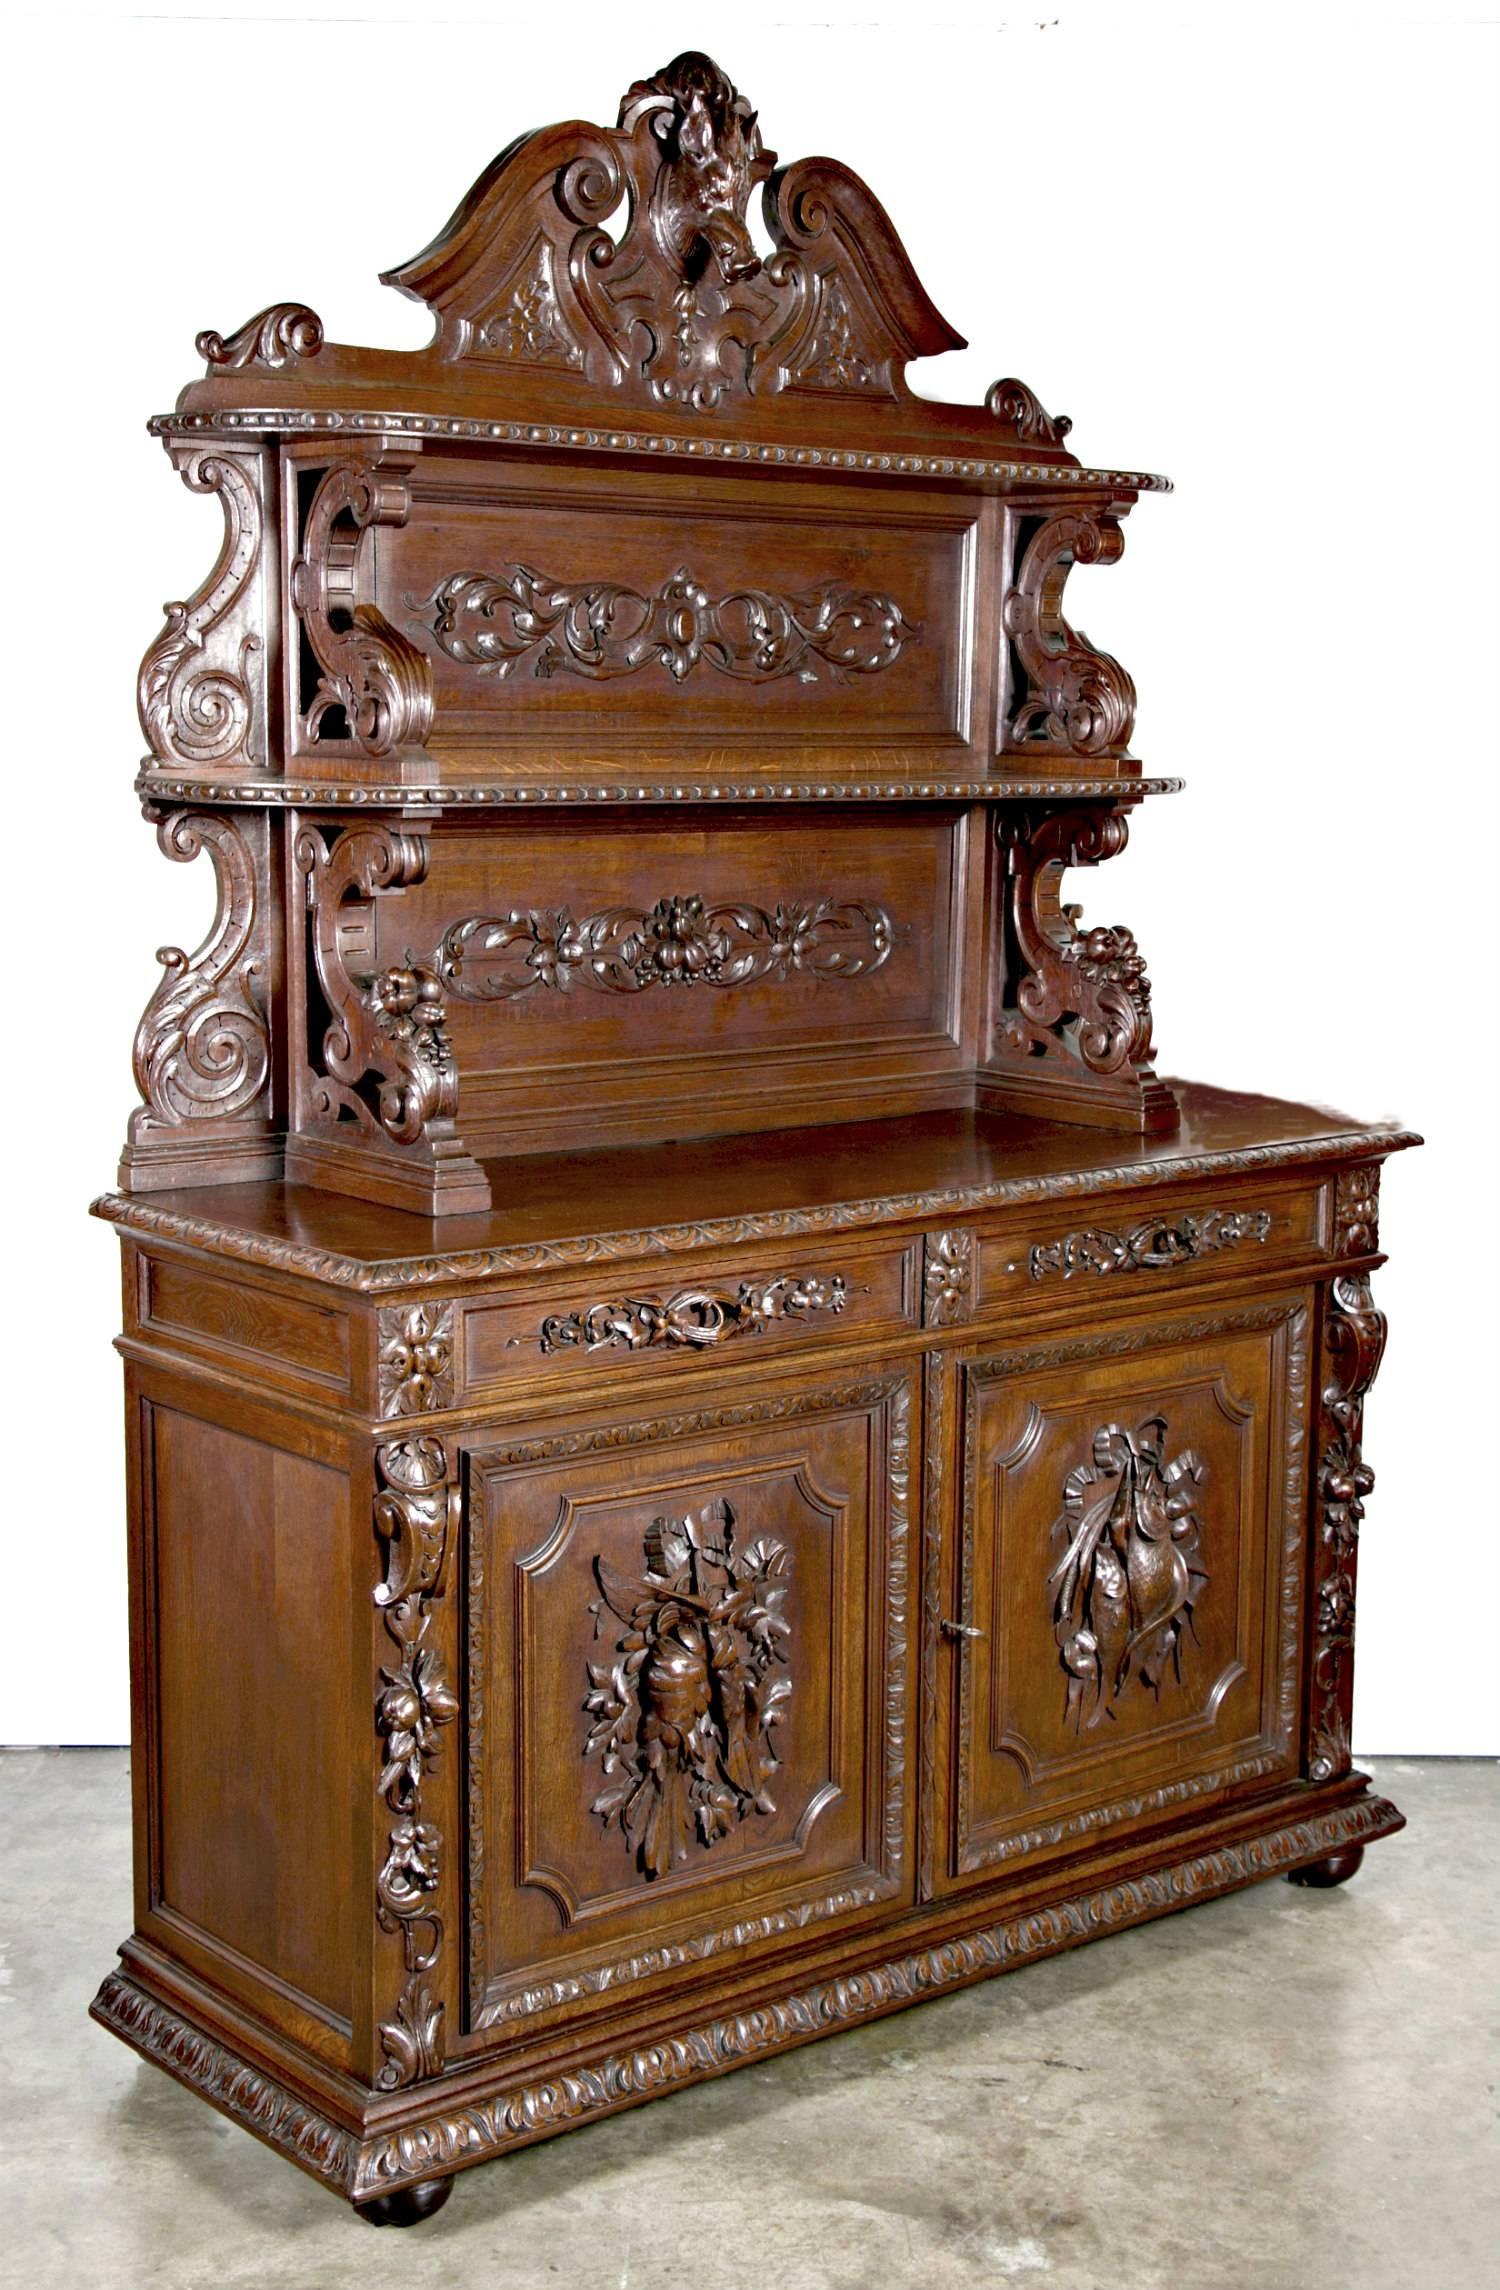 A stunning example of Rennaisance style furniture, this mid-19th century French St. Hubert Buffet de Chasse or hunting vaisselier is richly and intricately carved with motifs of animals of the hunt, fruit, nuts and vines. Buffet de chasse were found